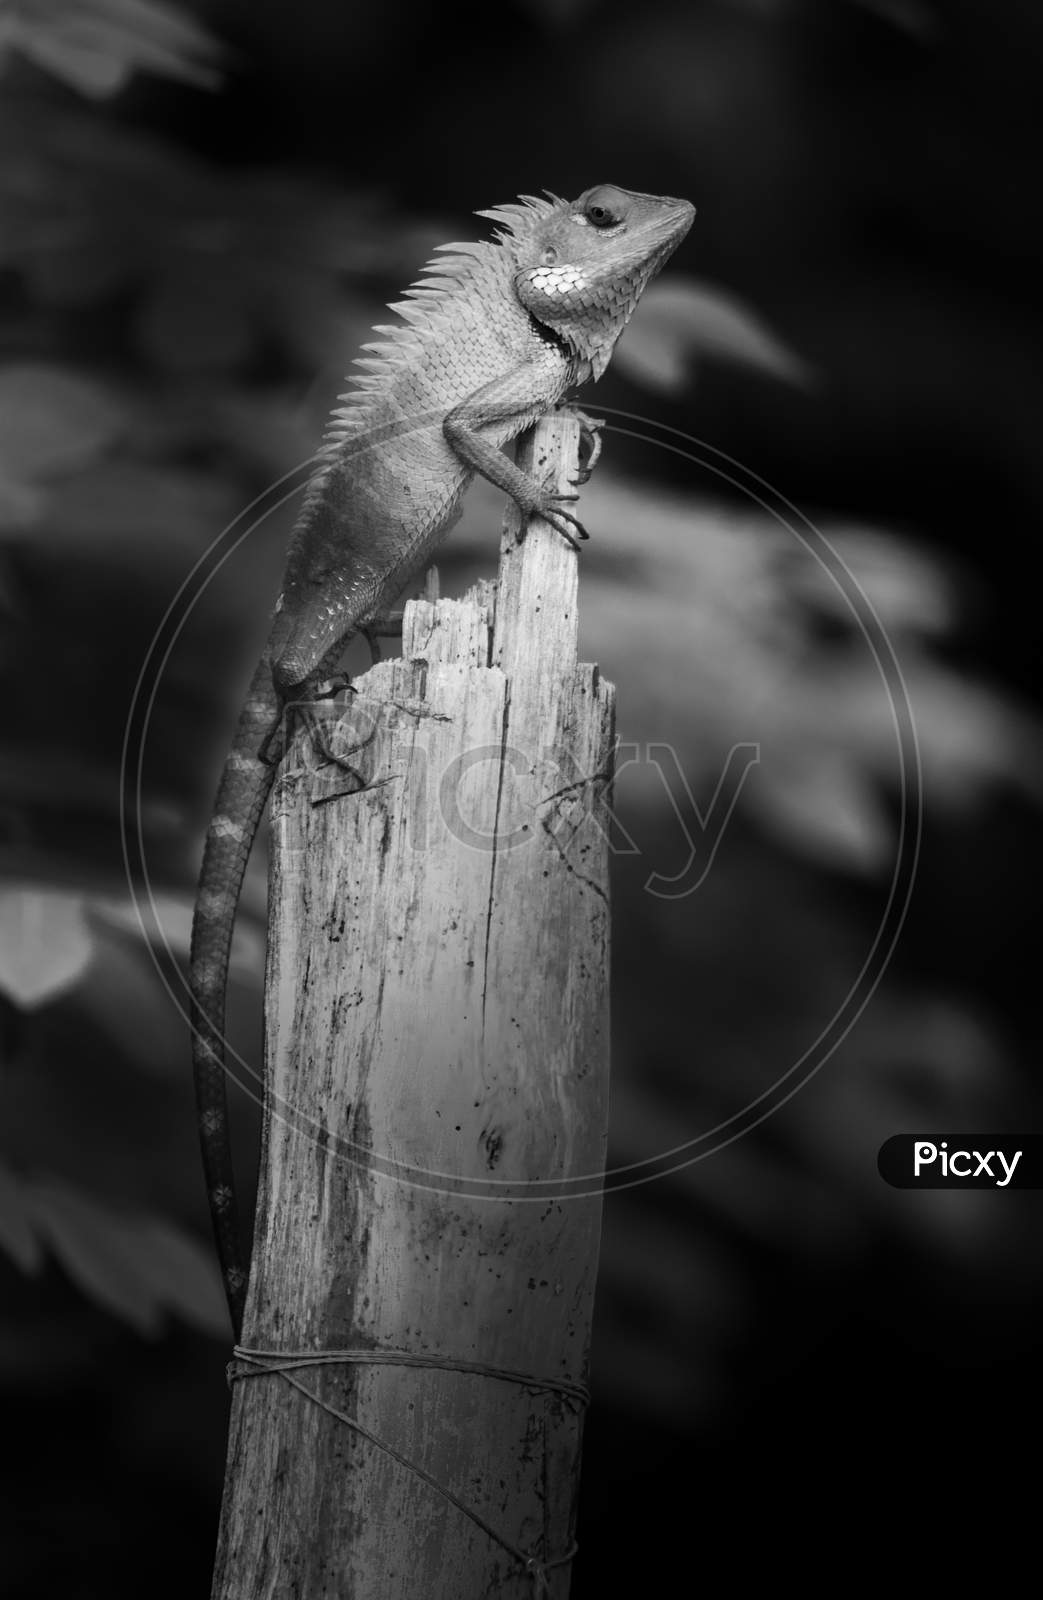 Beautiful Green Garden Lizard Climb And Sitting On Top Of The Wooden Trunk Like A King Of The Jungle, Bright Colored Head And Sharp Spikes In The Spine, Black And White Wild Life Photograph Of Lizard.